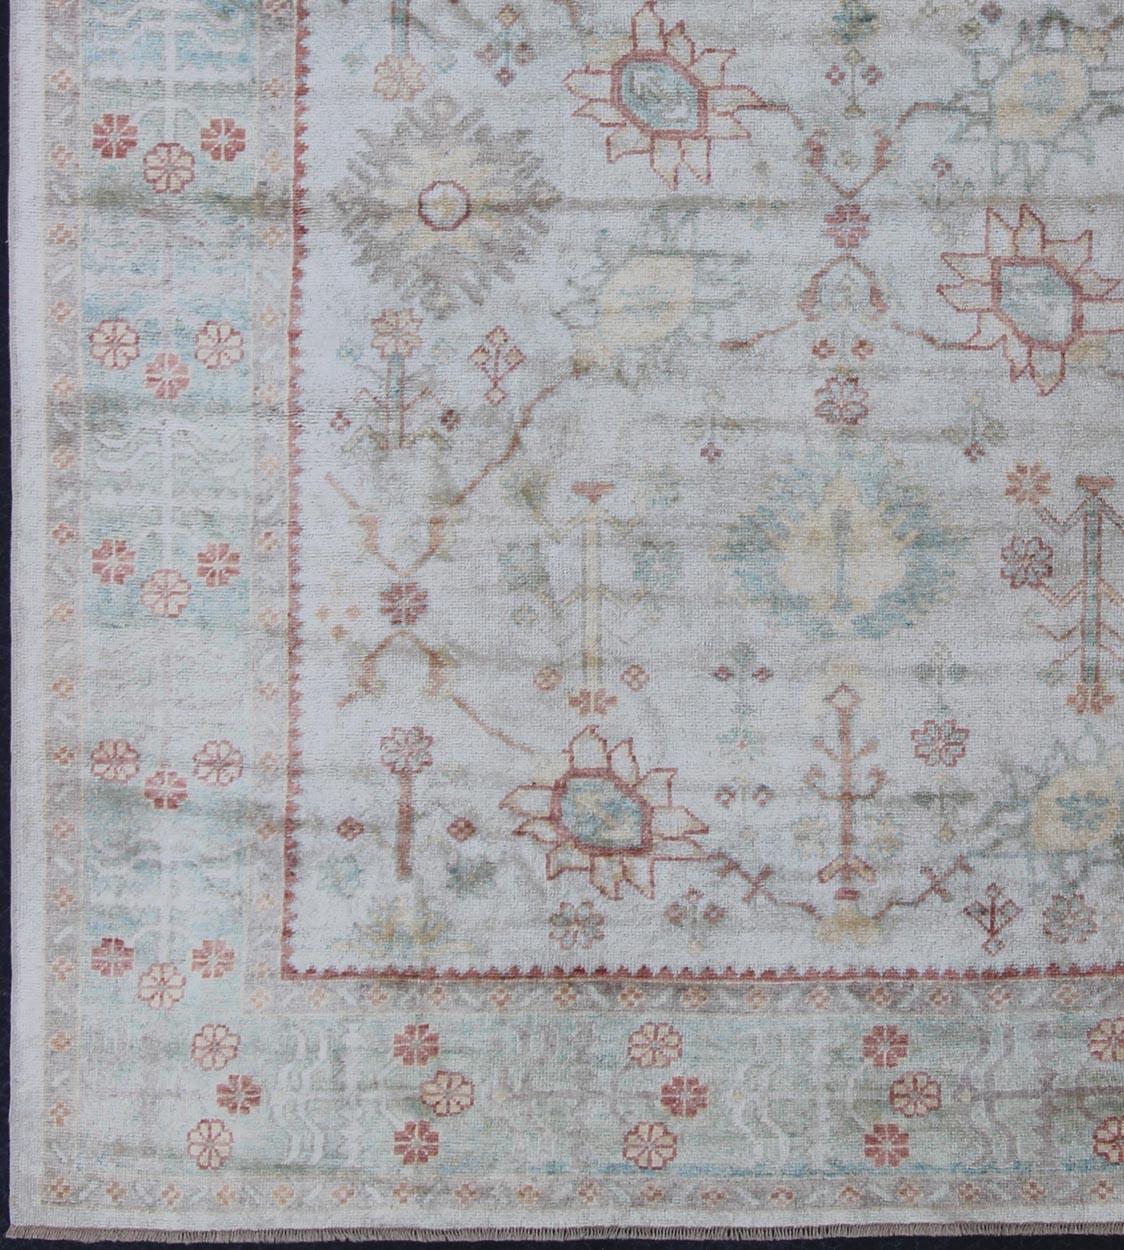 Keivan Woven Arts, En-3264, Turkish Oushak Rug- 9′4″ × 11′4″
This traditional Oushak rug from Turkey features a subdued, neutral color palette and an all-over design of floral shapes, surrounded beautifully by an all-encompassing, complementary